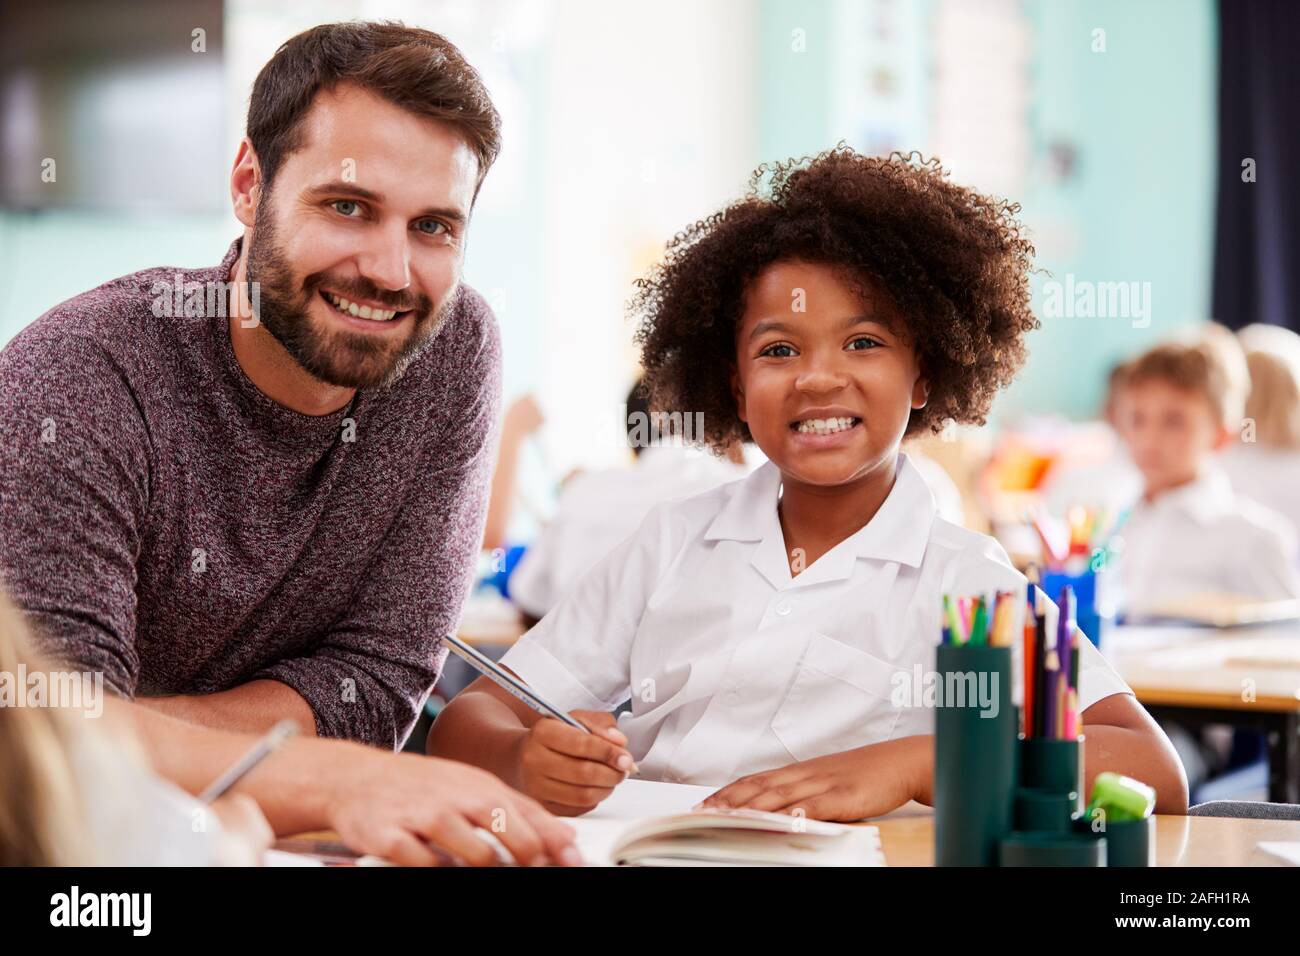 Portrait Of Male Elementary School Teacher Giving Female Pupil Wearing Uniform One To One Support Stock Photo